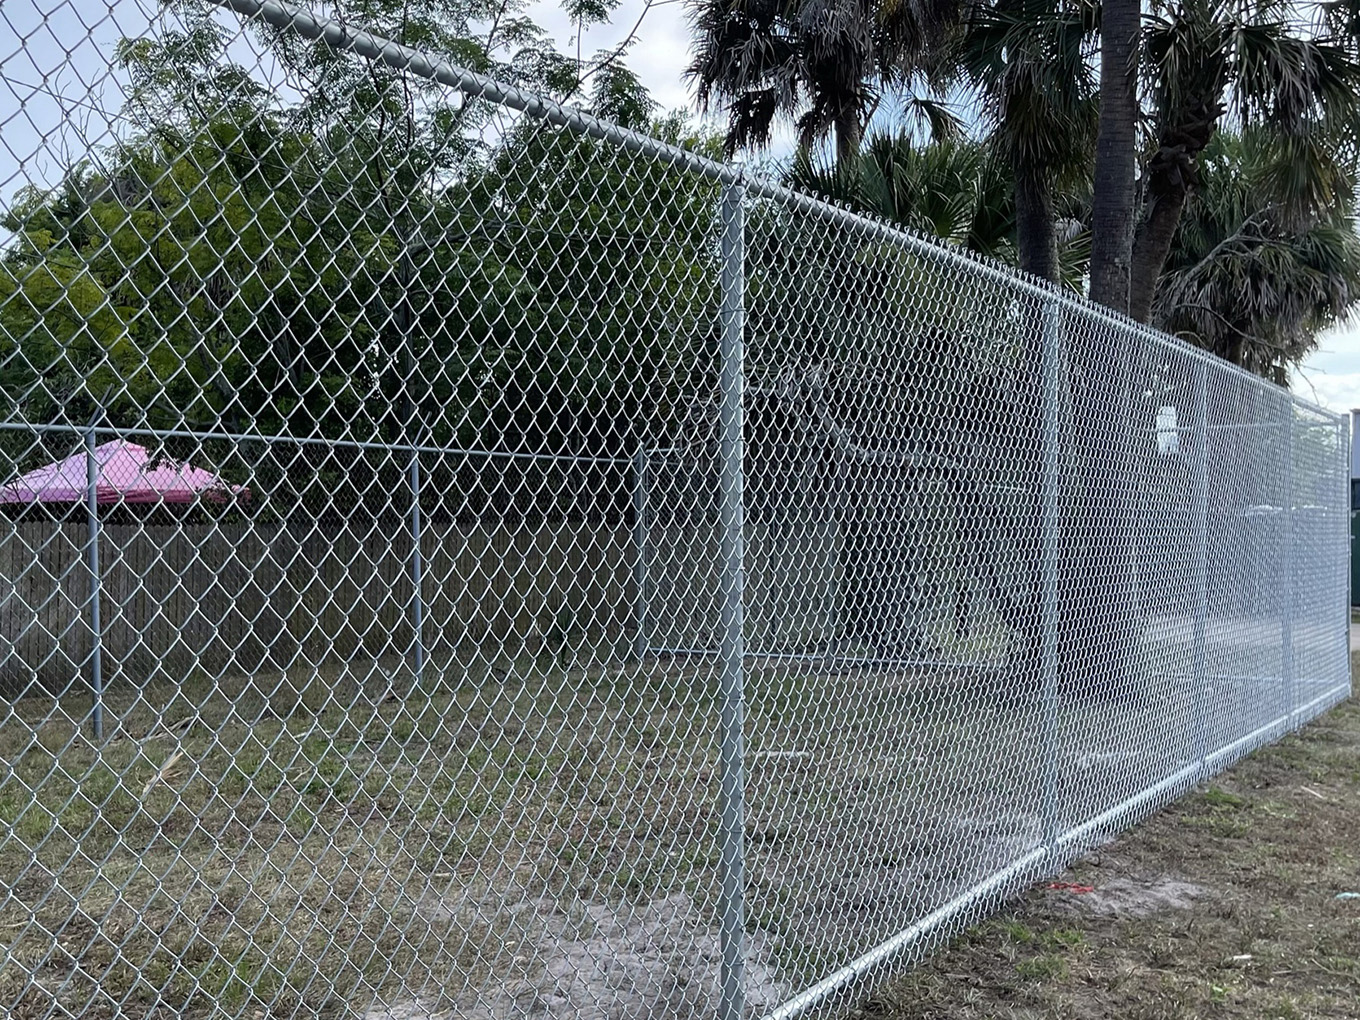 Photo of a chain link fence in St. Augustine, FL